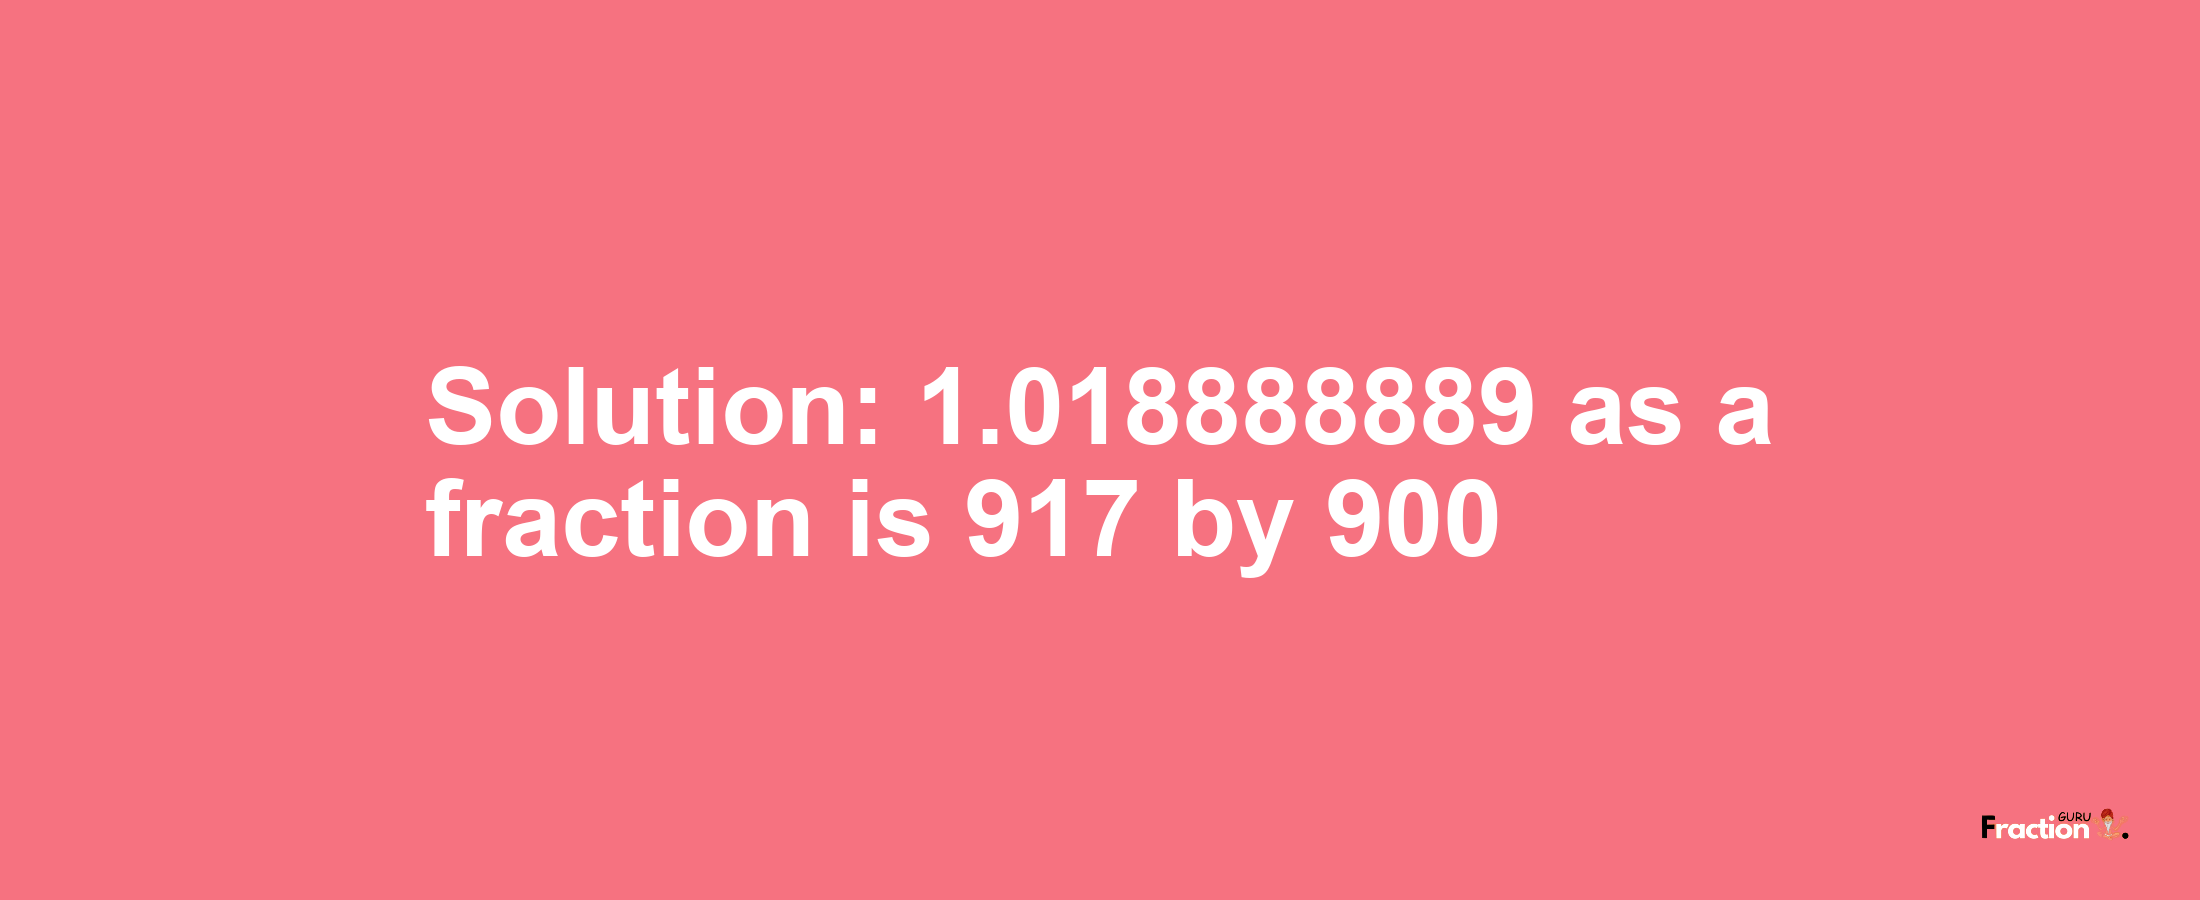 Solution:1.018888889 as a fraction is 917/900